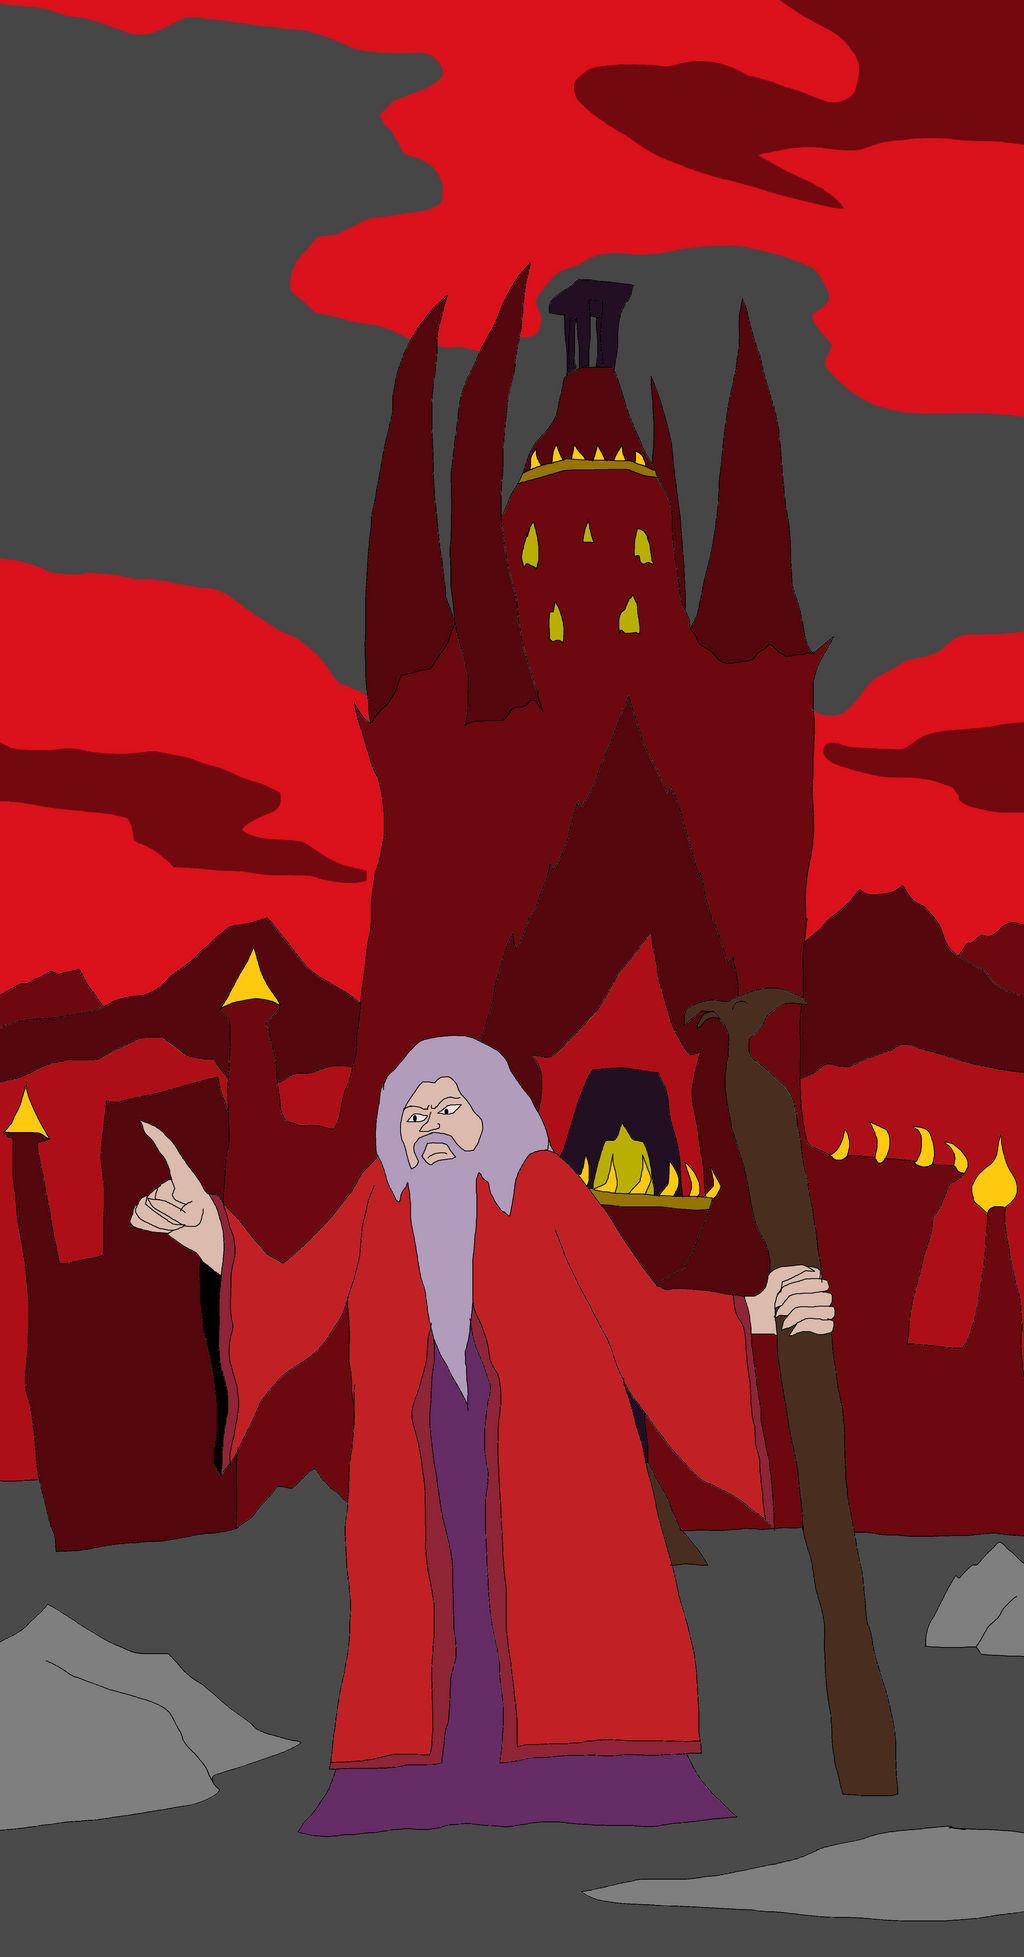 Lord of The Rings Animated Film Saruman by JA252 on DeviantArt